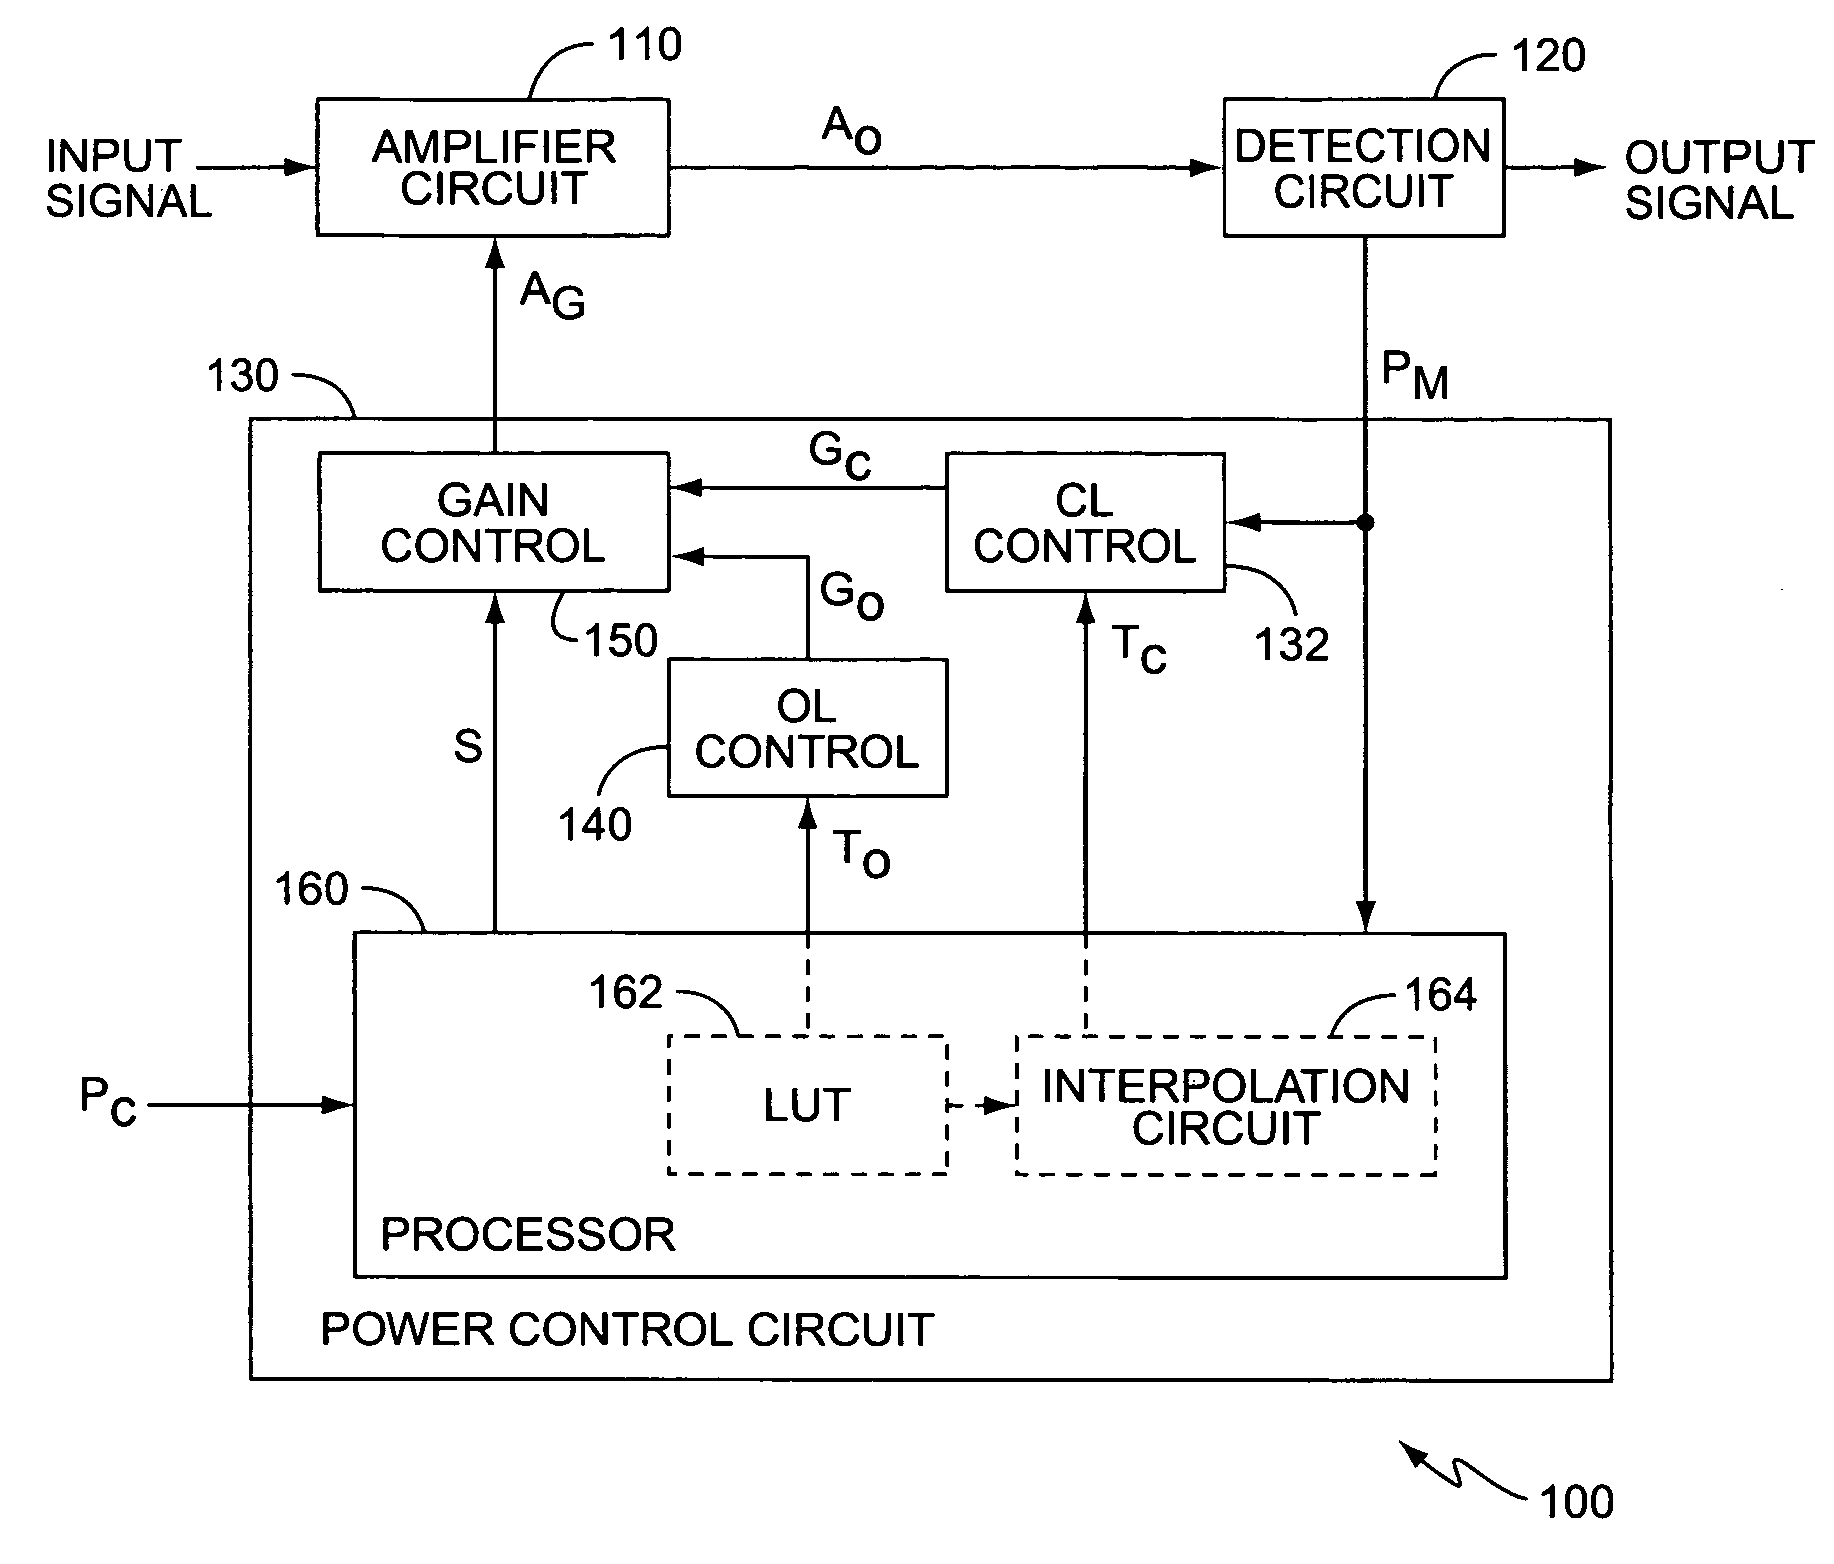 Continuous alternating closed-open loop power control